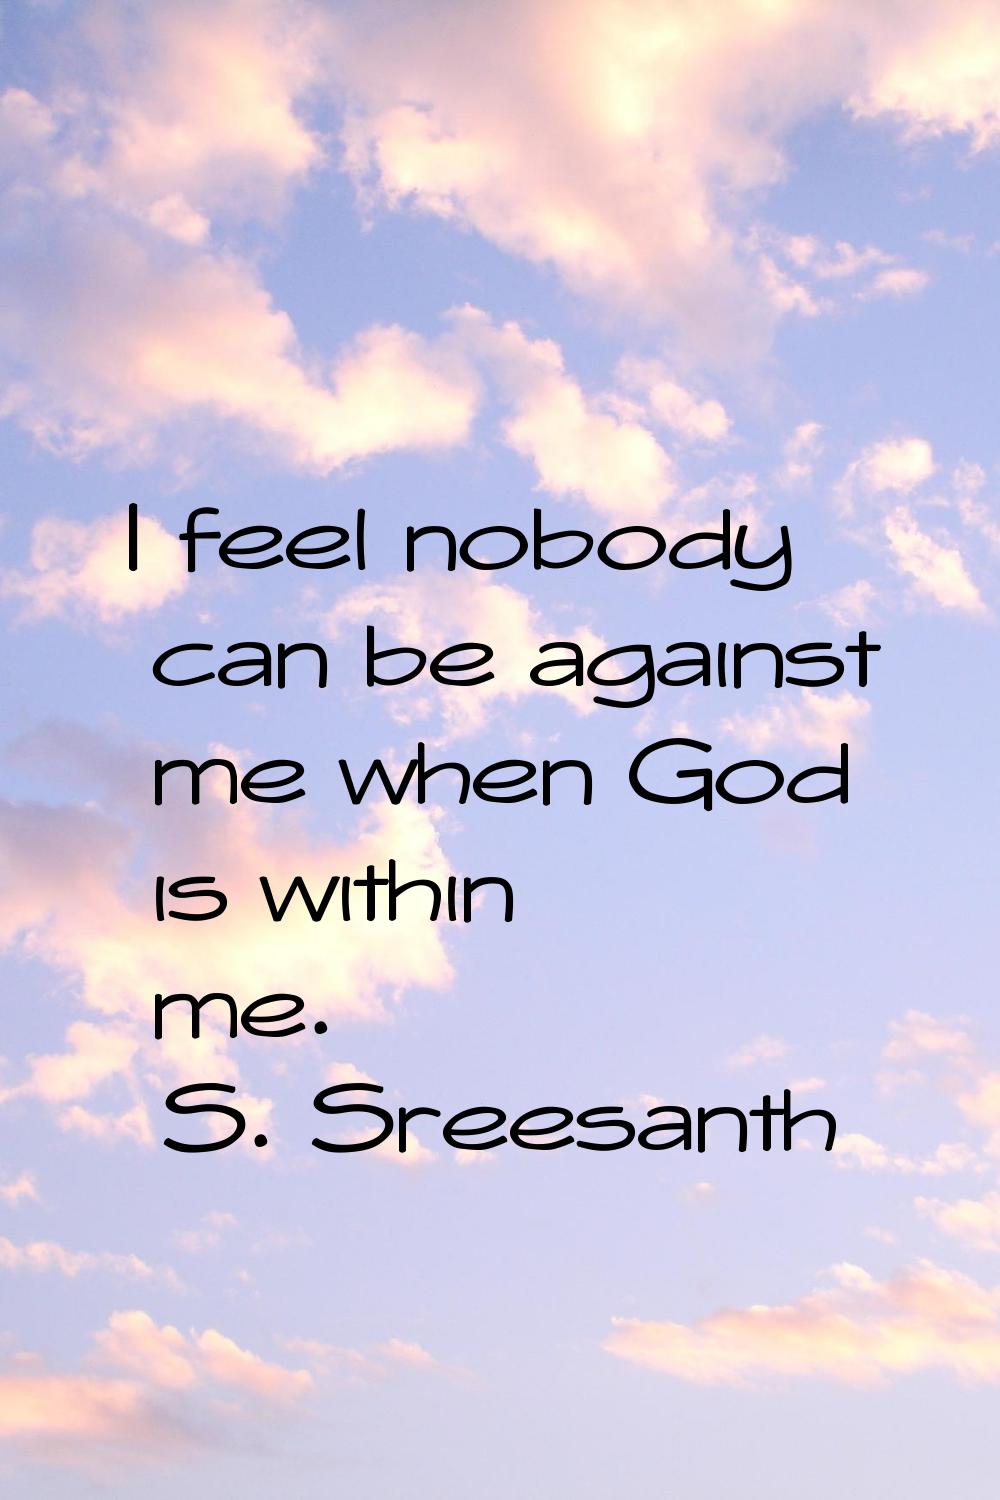 I feel nobody can be against me when God is within me.